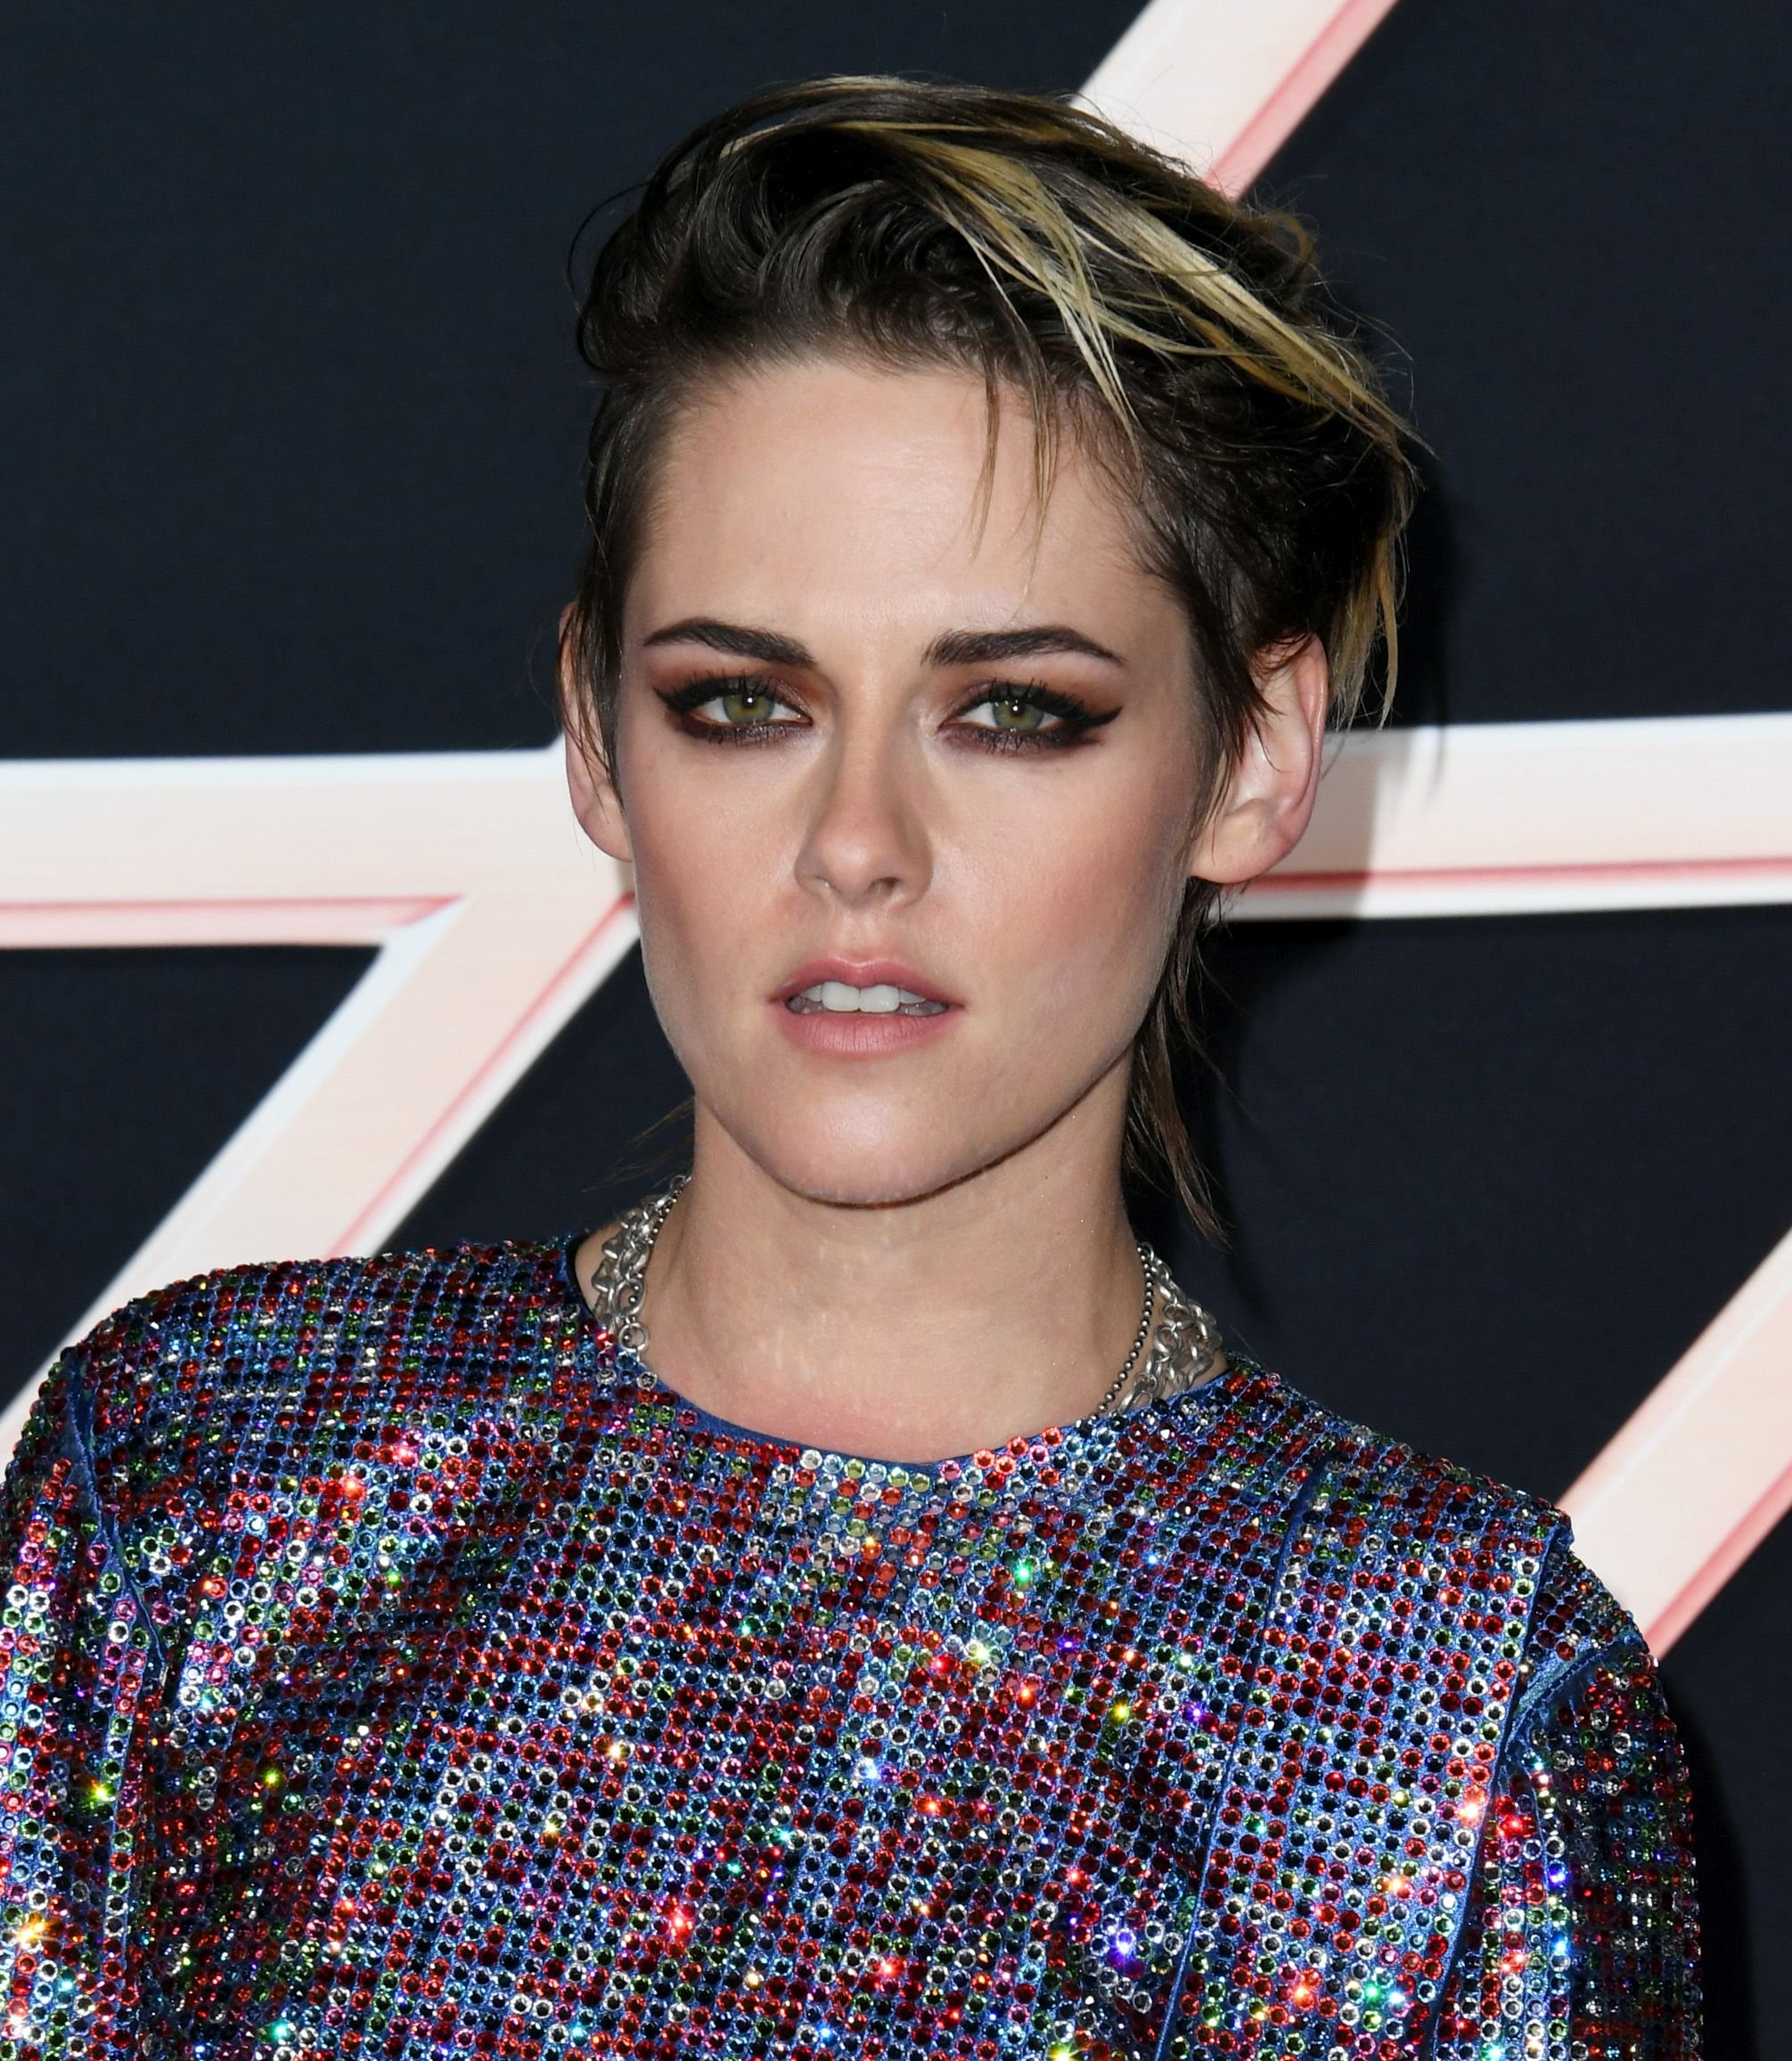 Kristen Stewart at the premiere of Columbia Pictures' "Charlie's Angels" at Westwood Regency Theater on November 11, 2019. | Photo: Getty Images